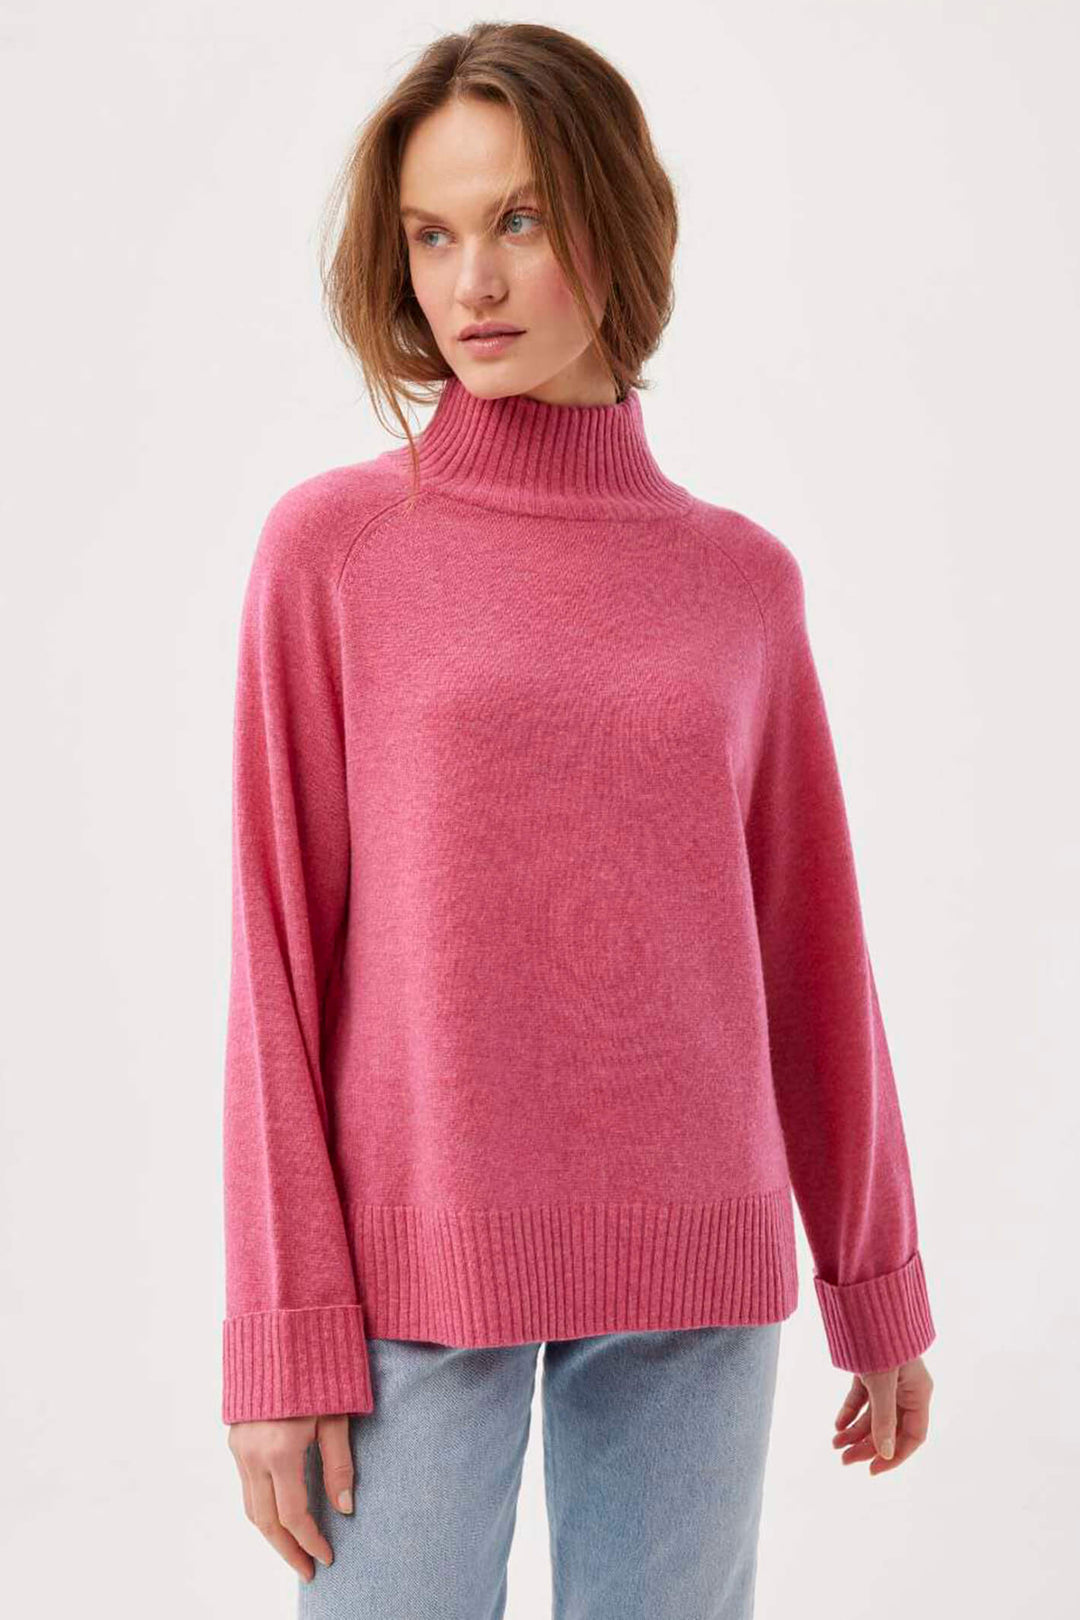 Mila Paloma NHM519 Pink Pure Cashmere Jumper - Experience Boutique